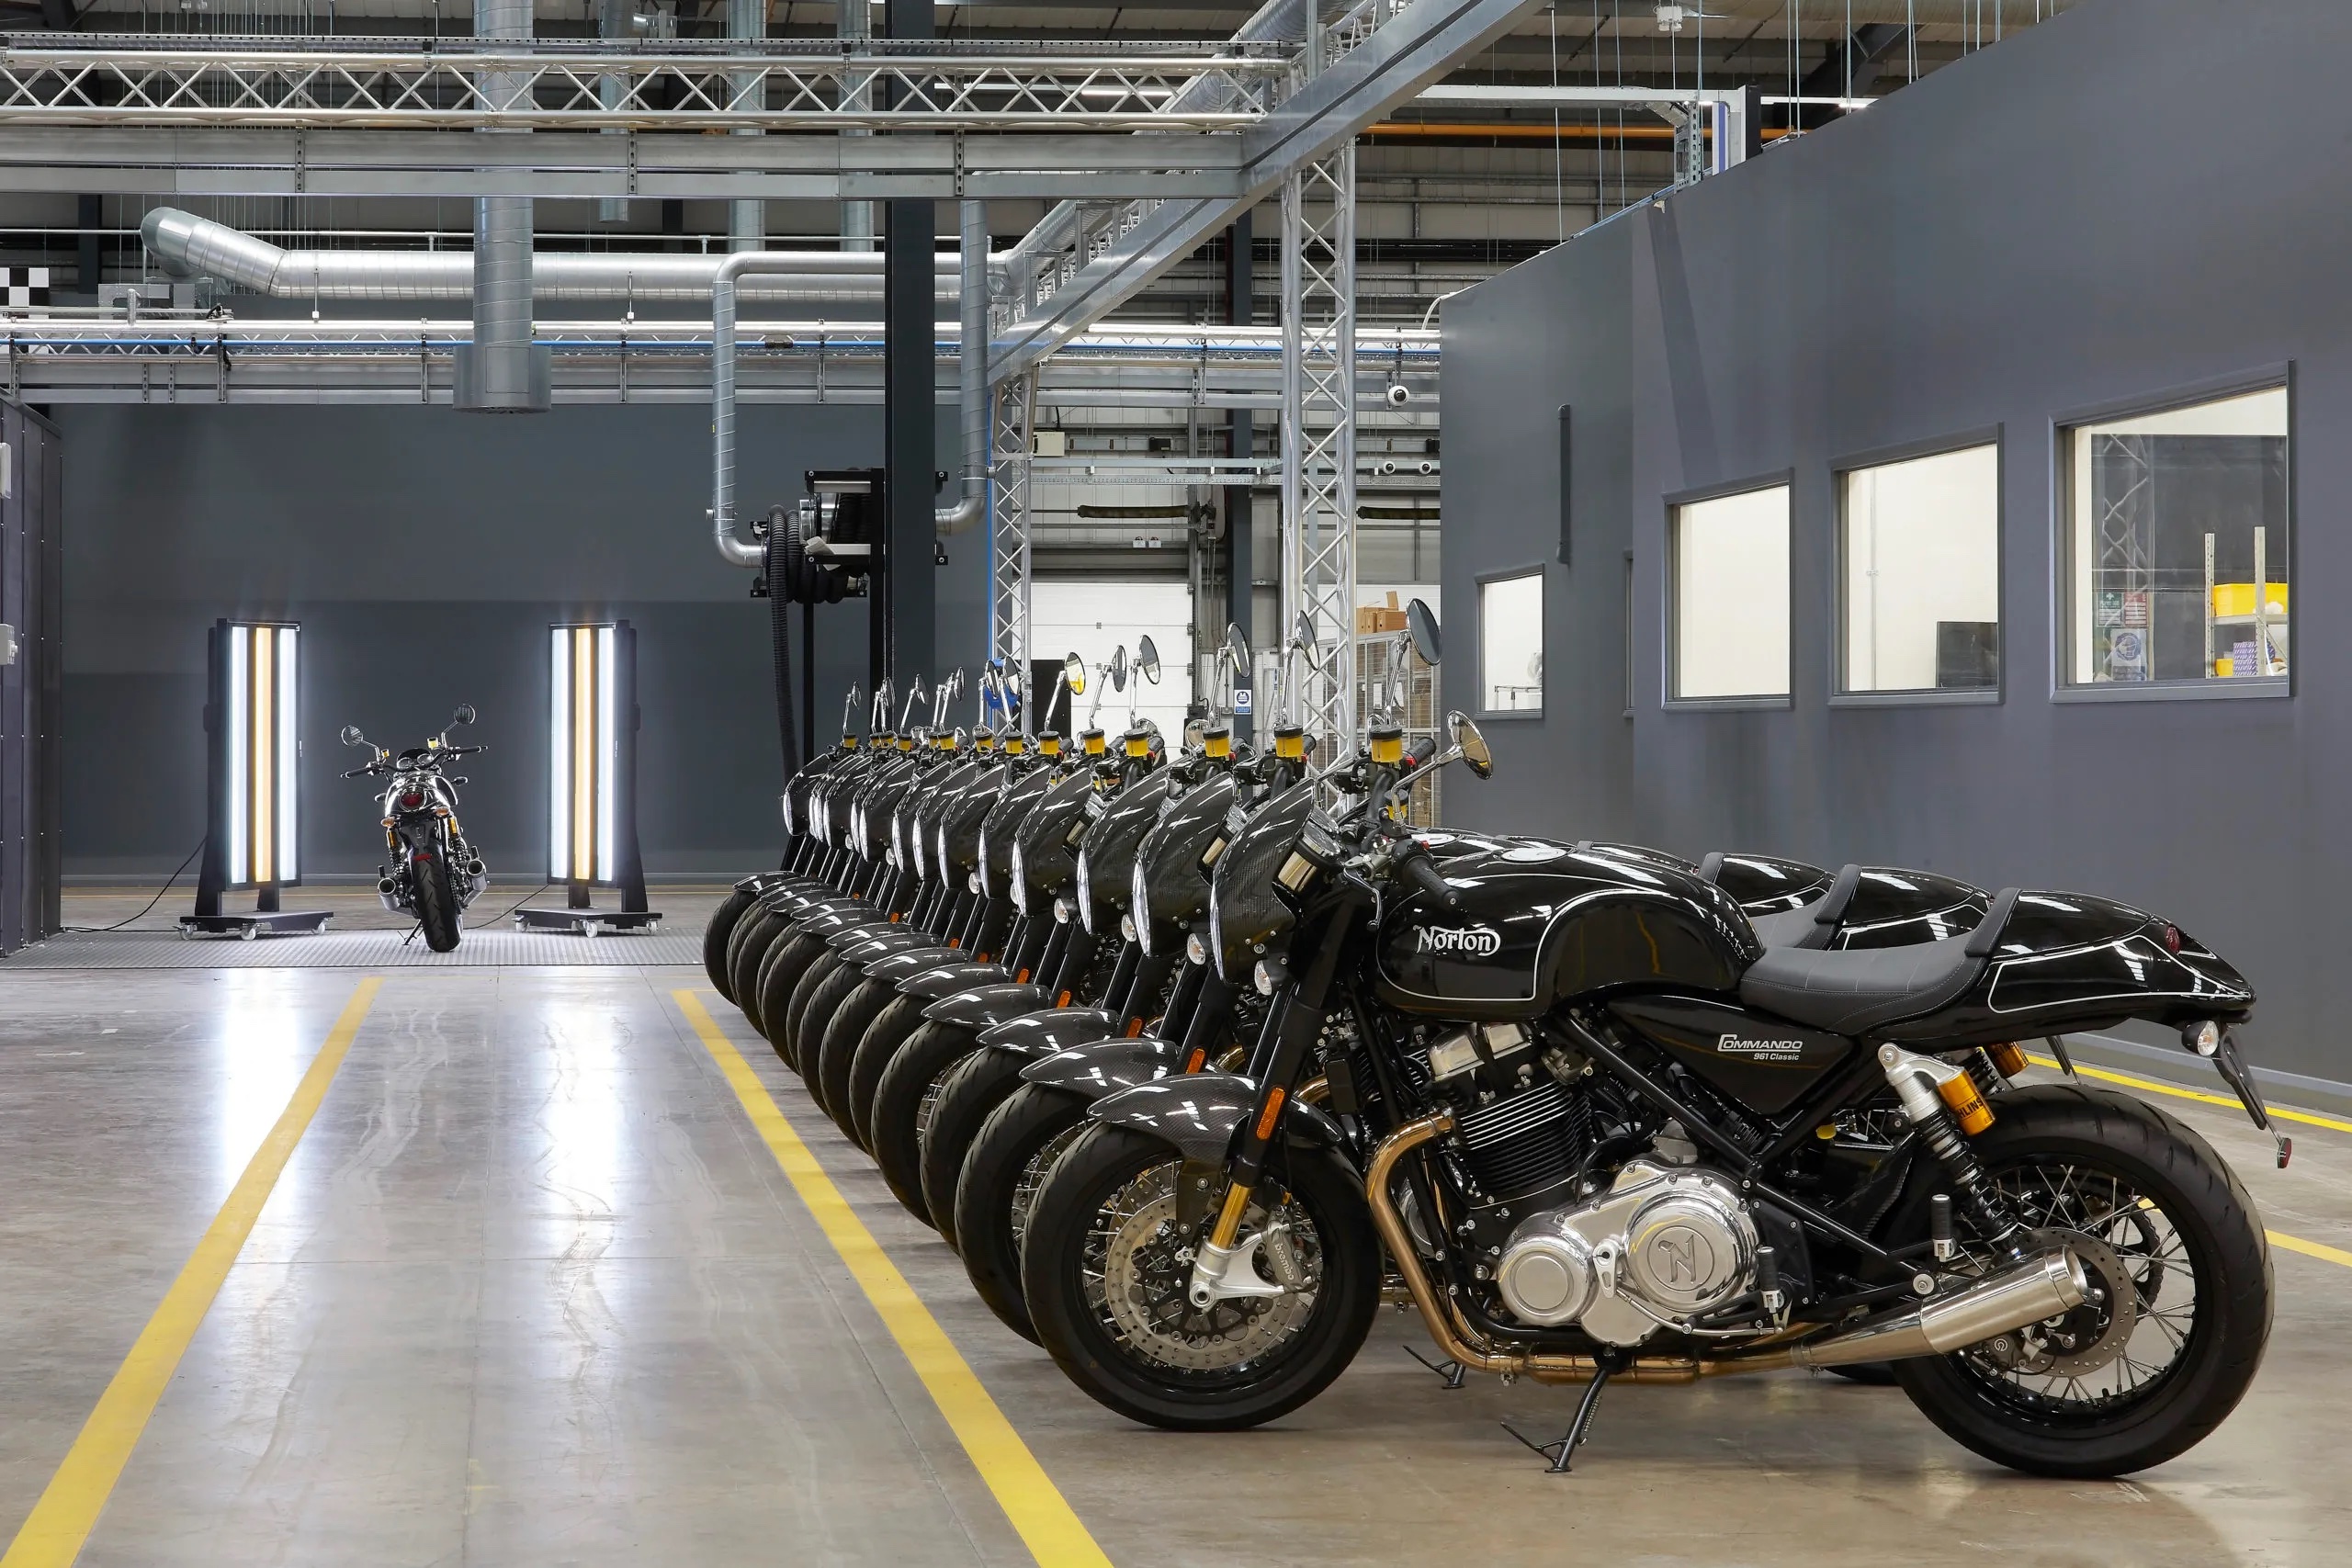 Norton Motorcycles in a Canadian-based facility